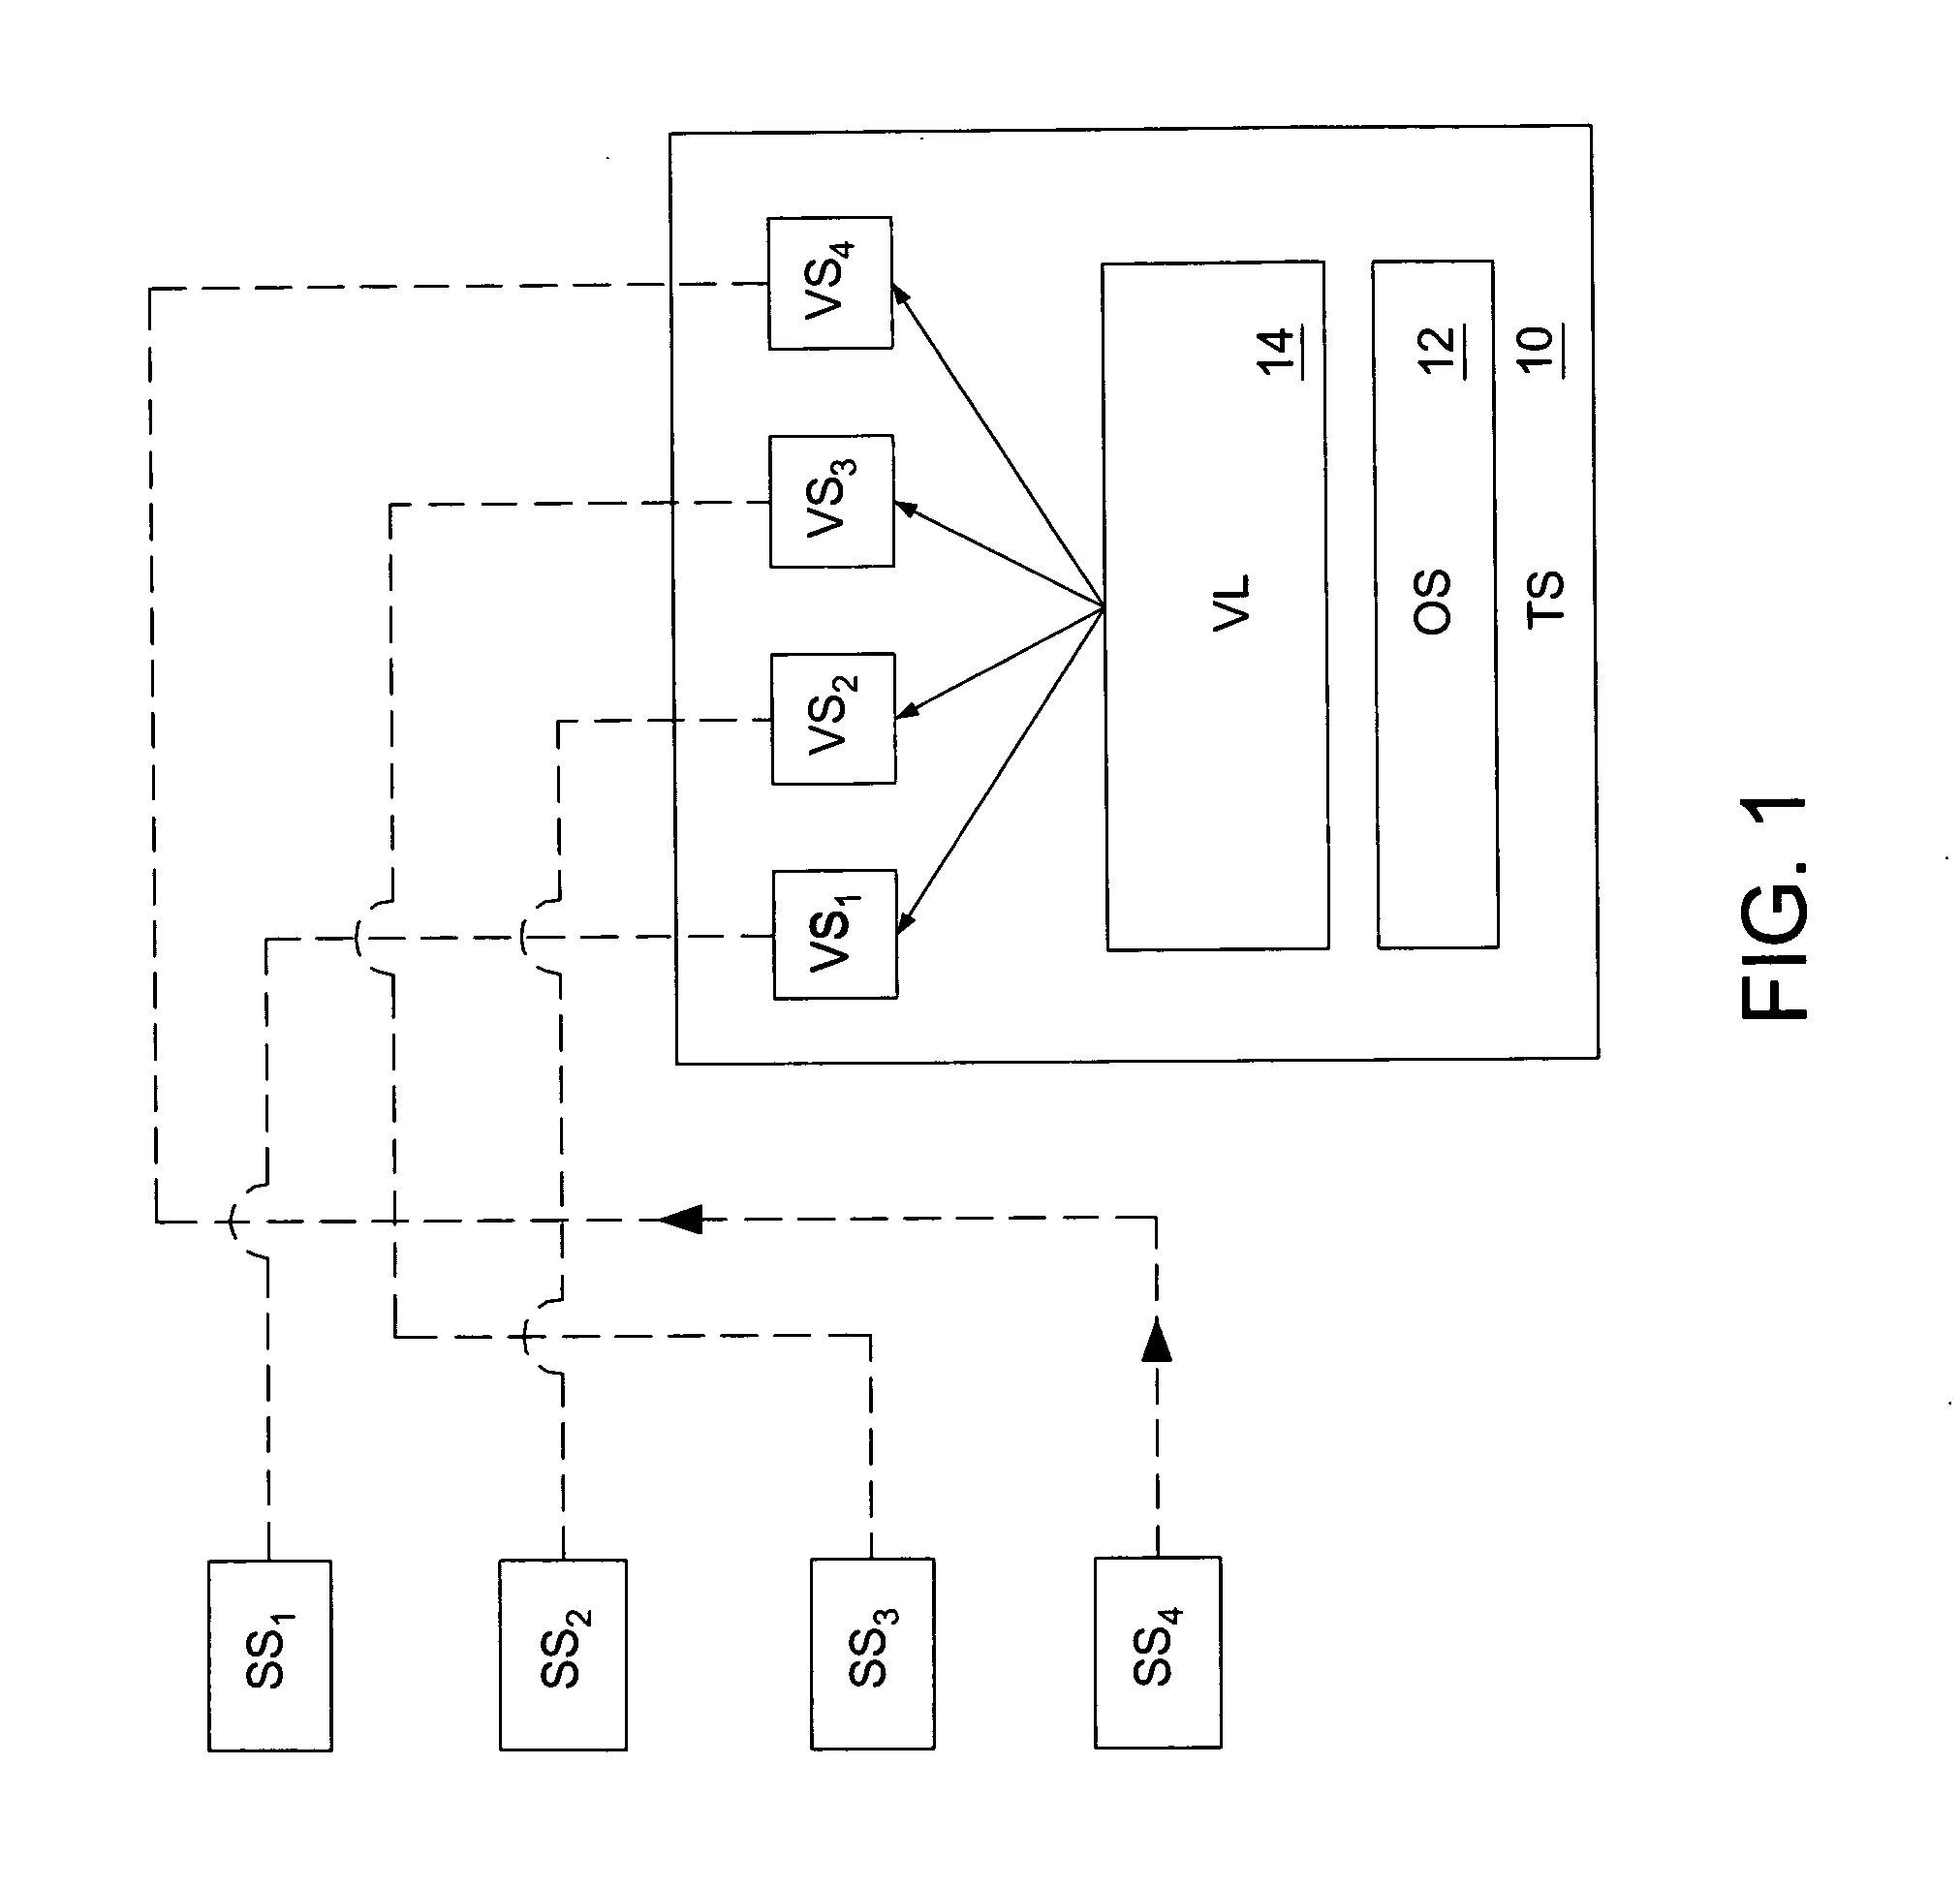 System and method of determining an optimal distribution of source servers in target servers